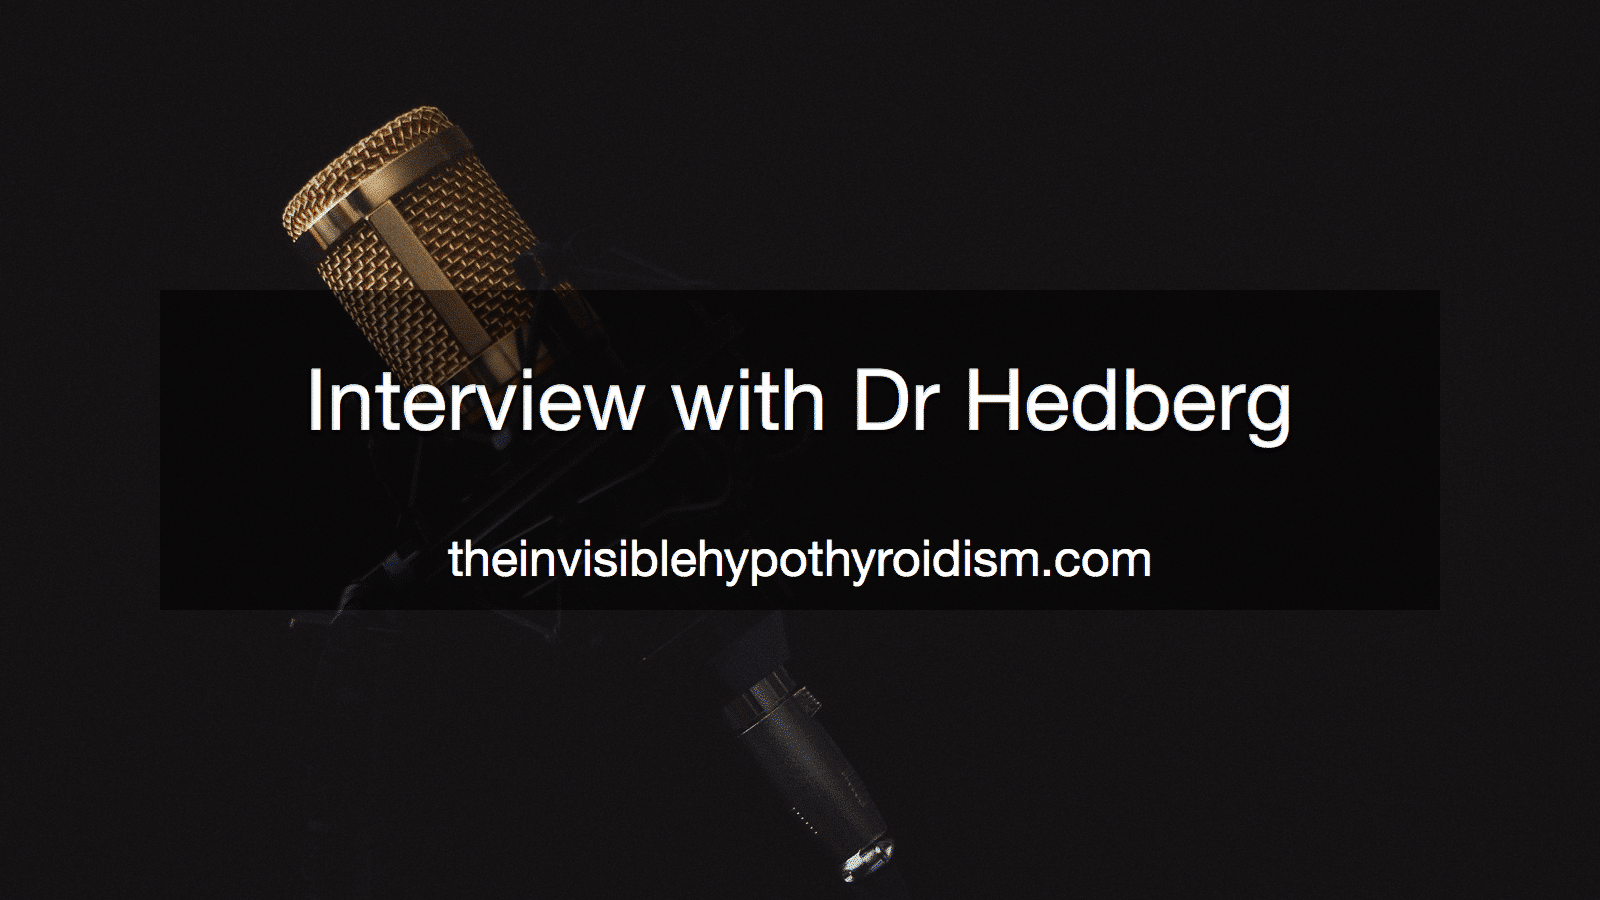 Interview with Dr Hedberg